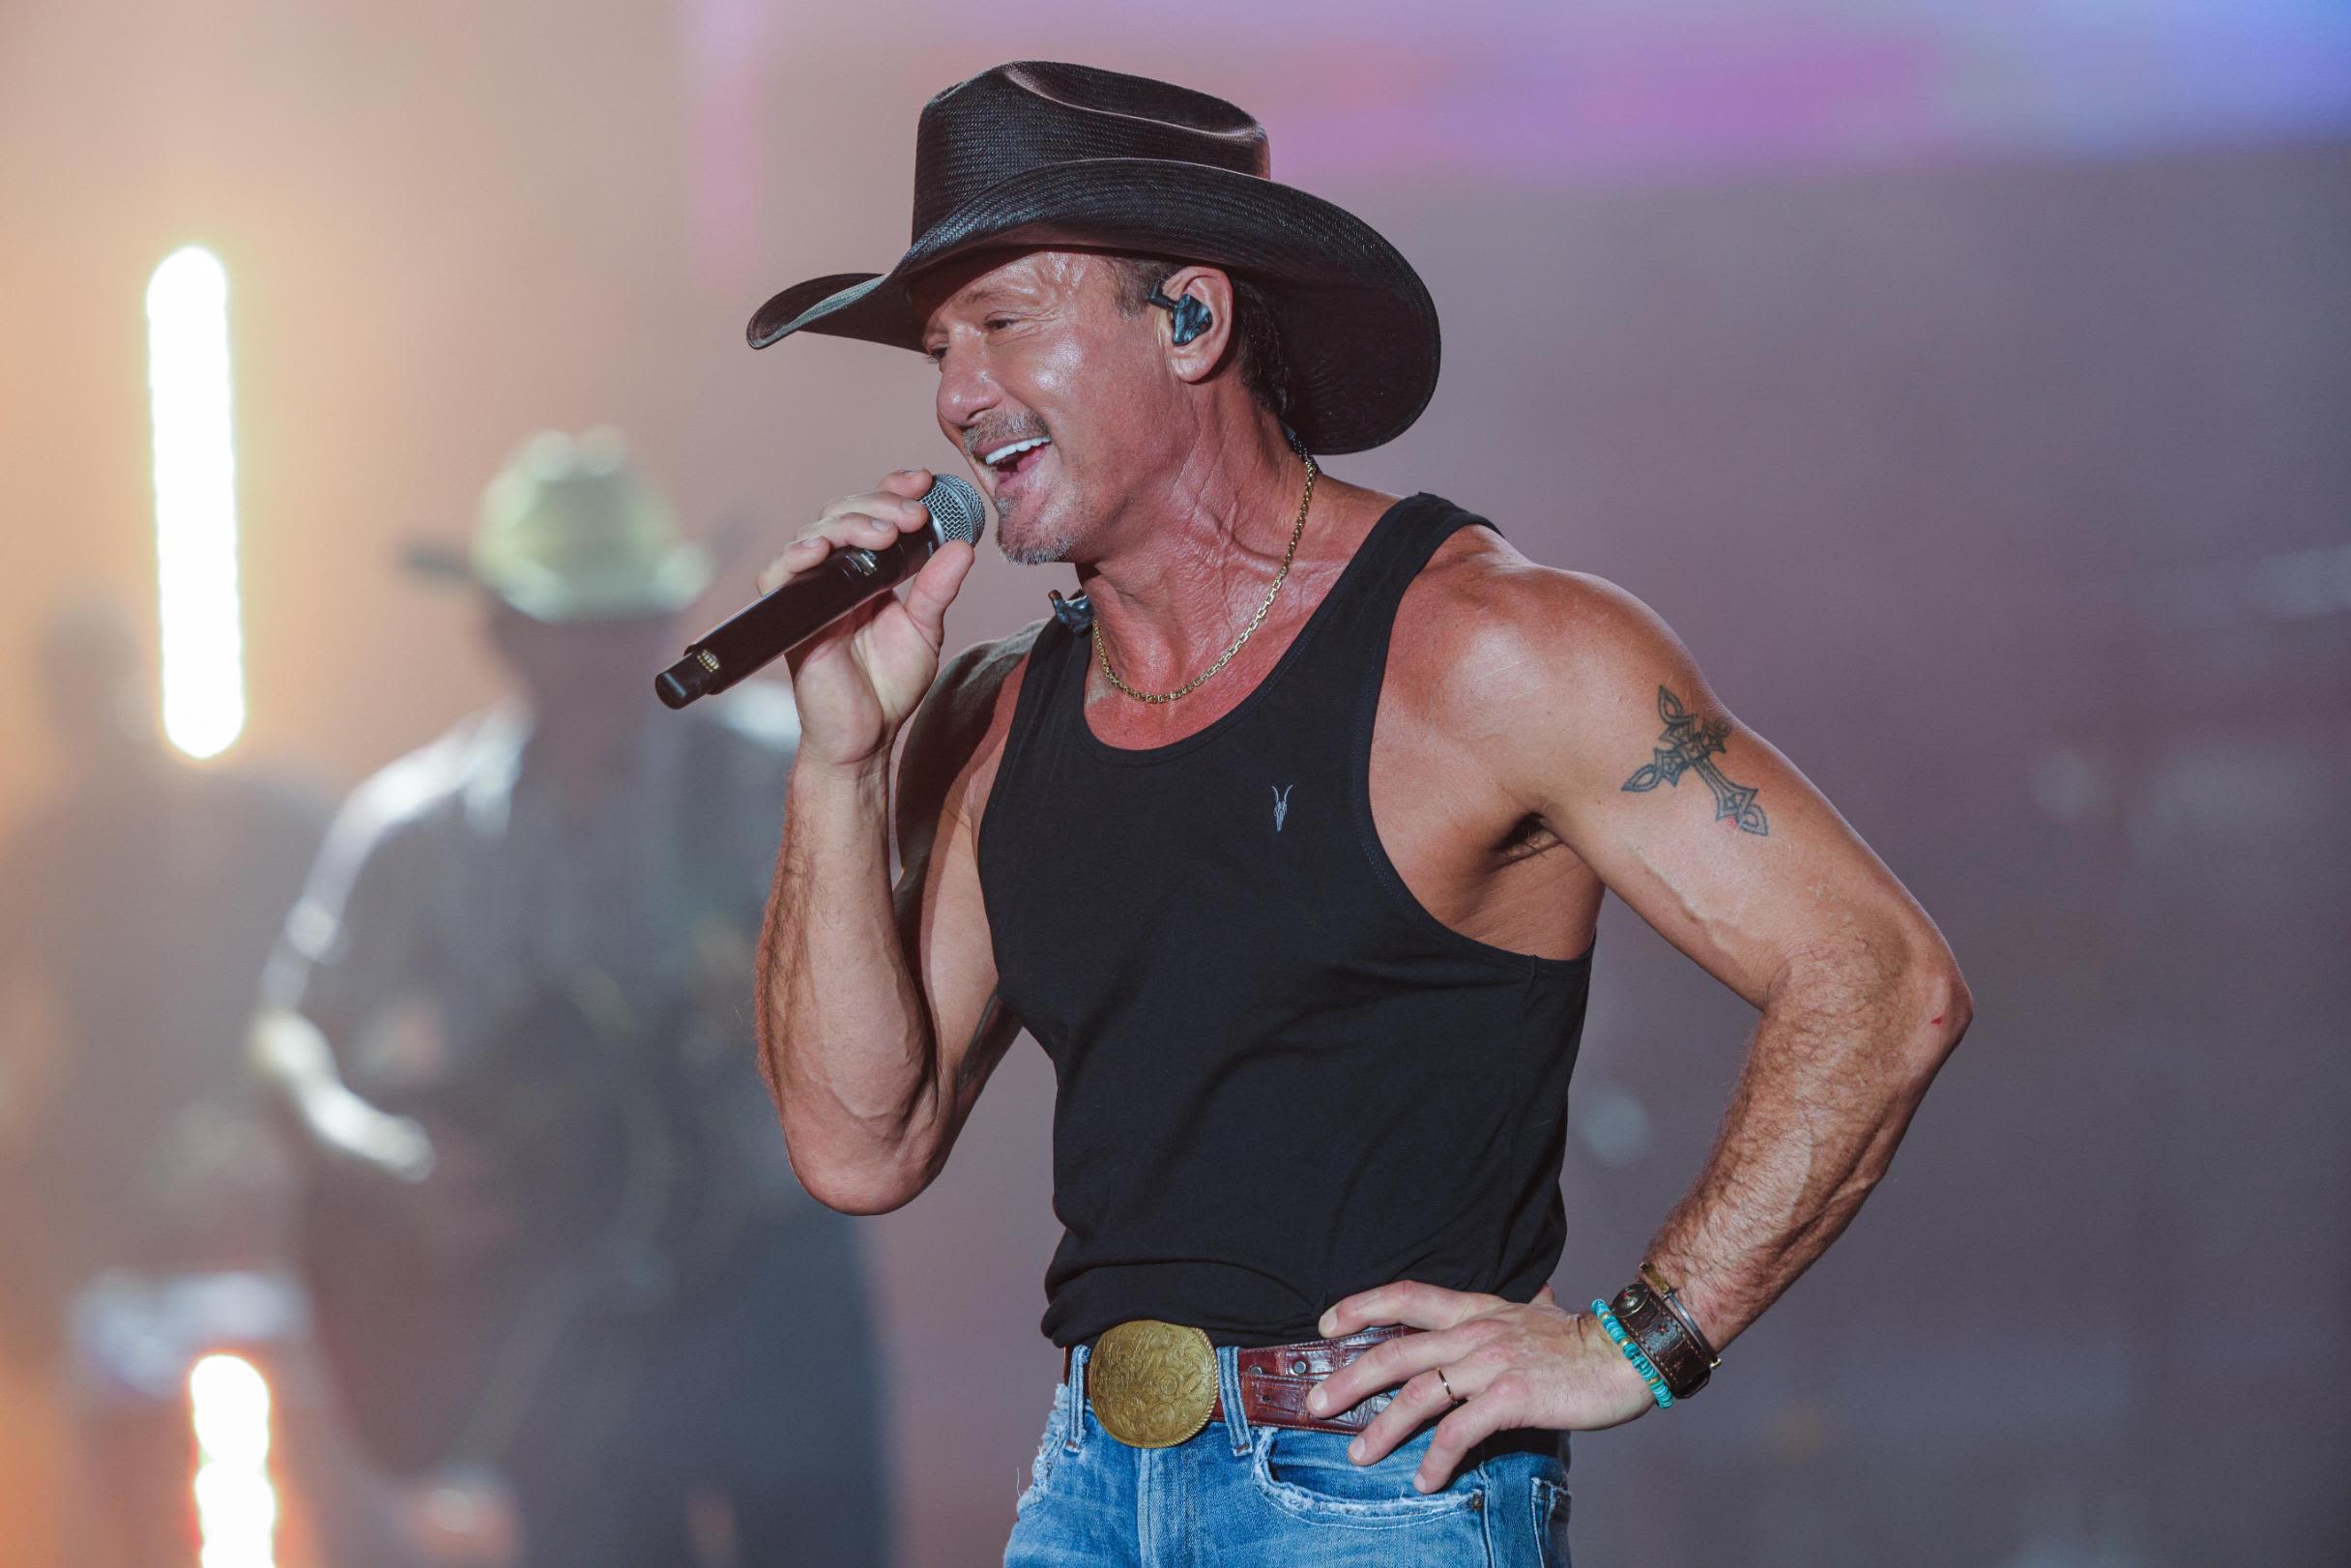 Tim McGraw falls off stage during concert, uses moment to bond with fans - richy.com.vn